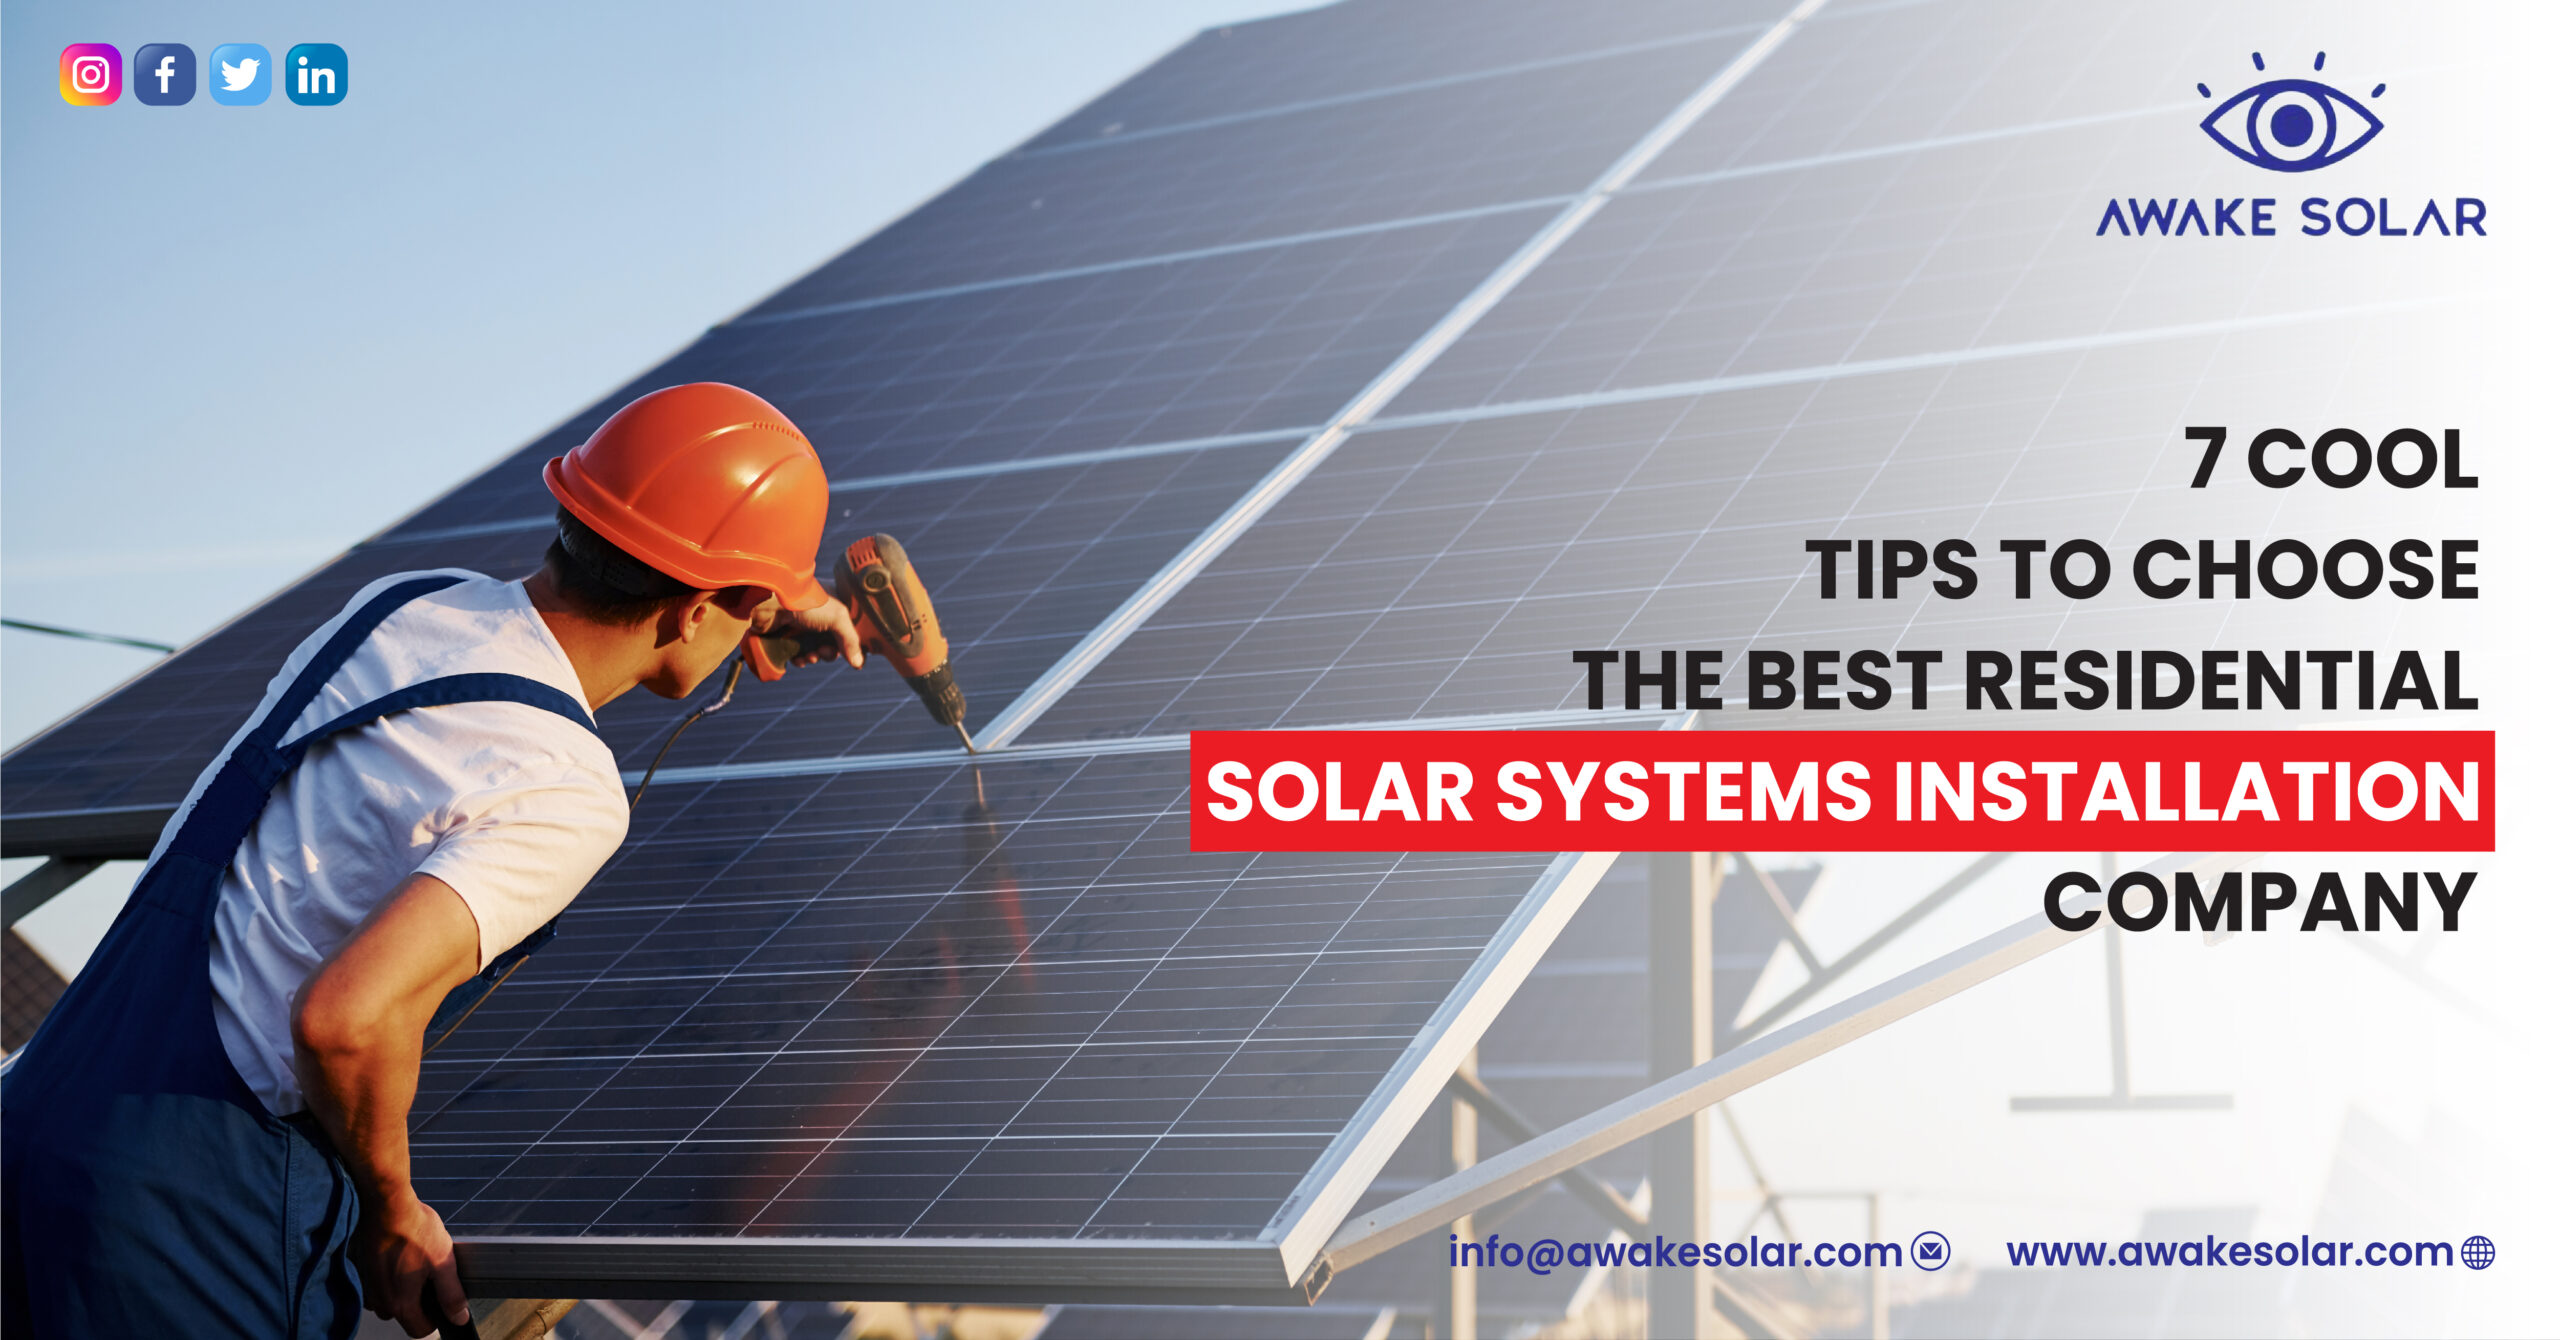 The Best Residential Solar Systems Installation - Tips to Choose